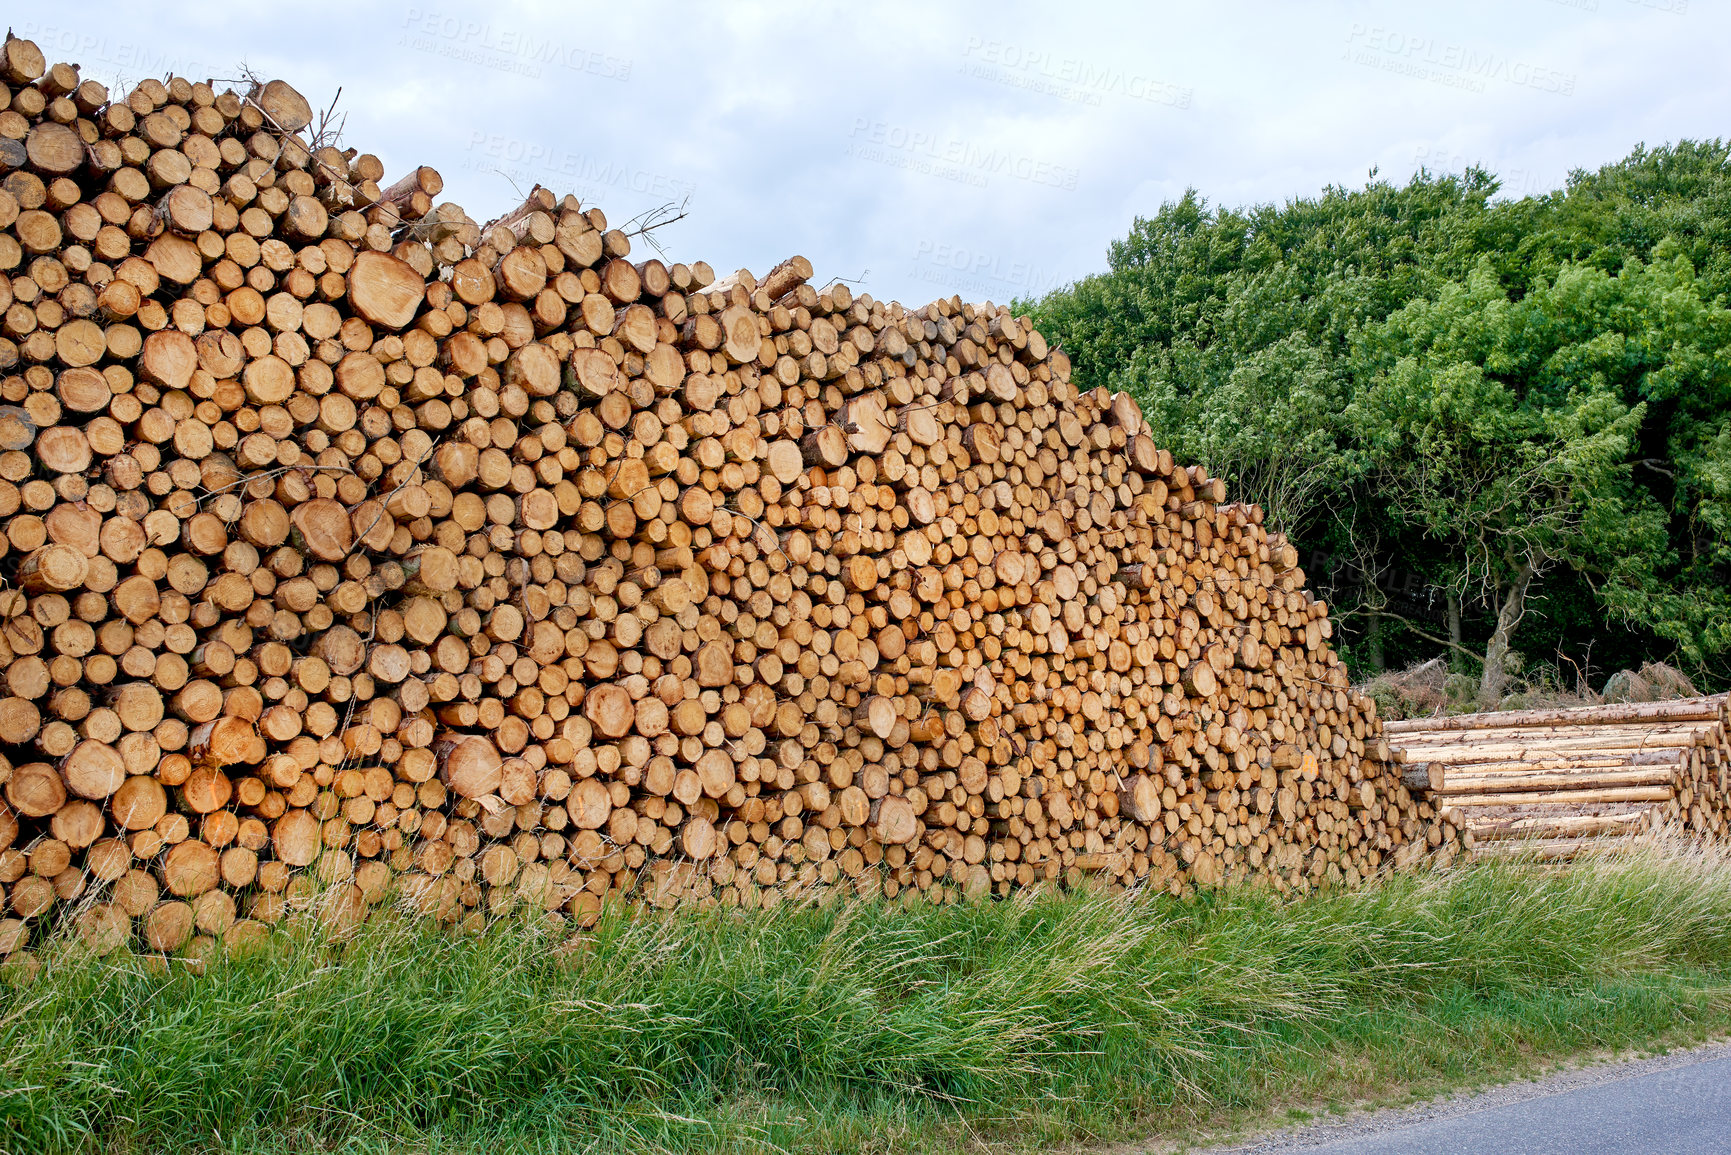 Buy stock photo Cut logs of beech trees stacked in a heaped pile. Deforestation and felling of forest woods in lumber industry for firewood and energy resource. Import and export of wood used as timber for building